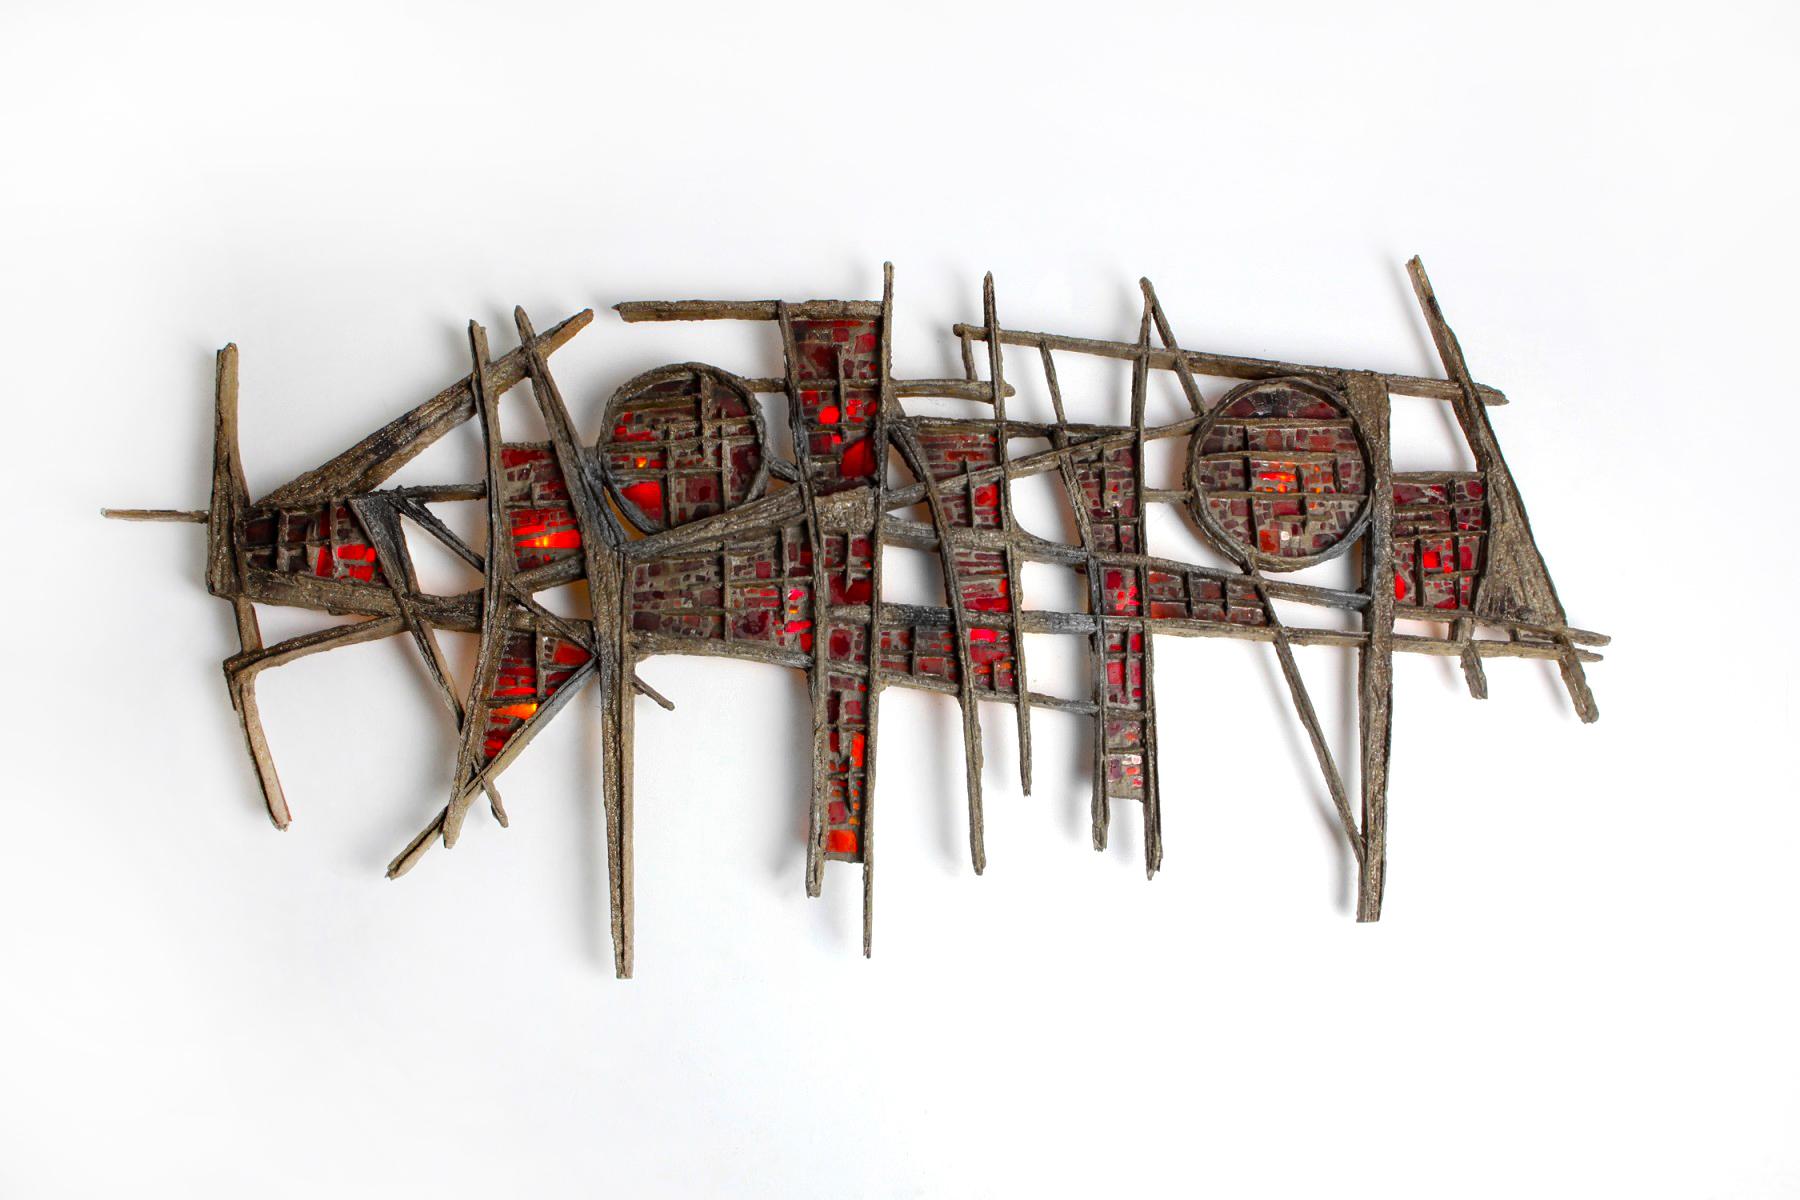 Belgian Pia Manu Brutalist Illuminated Wall Sculpture in Steel & Red Stained Glass 1970s For Sale